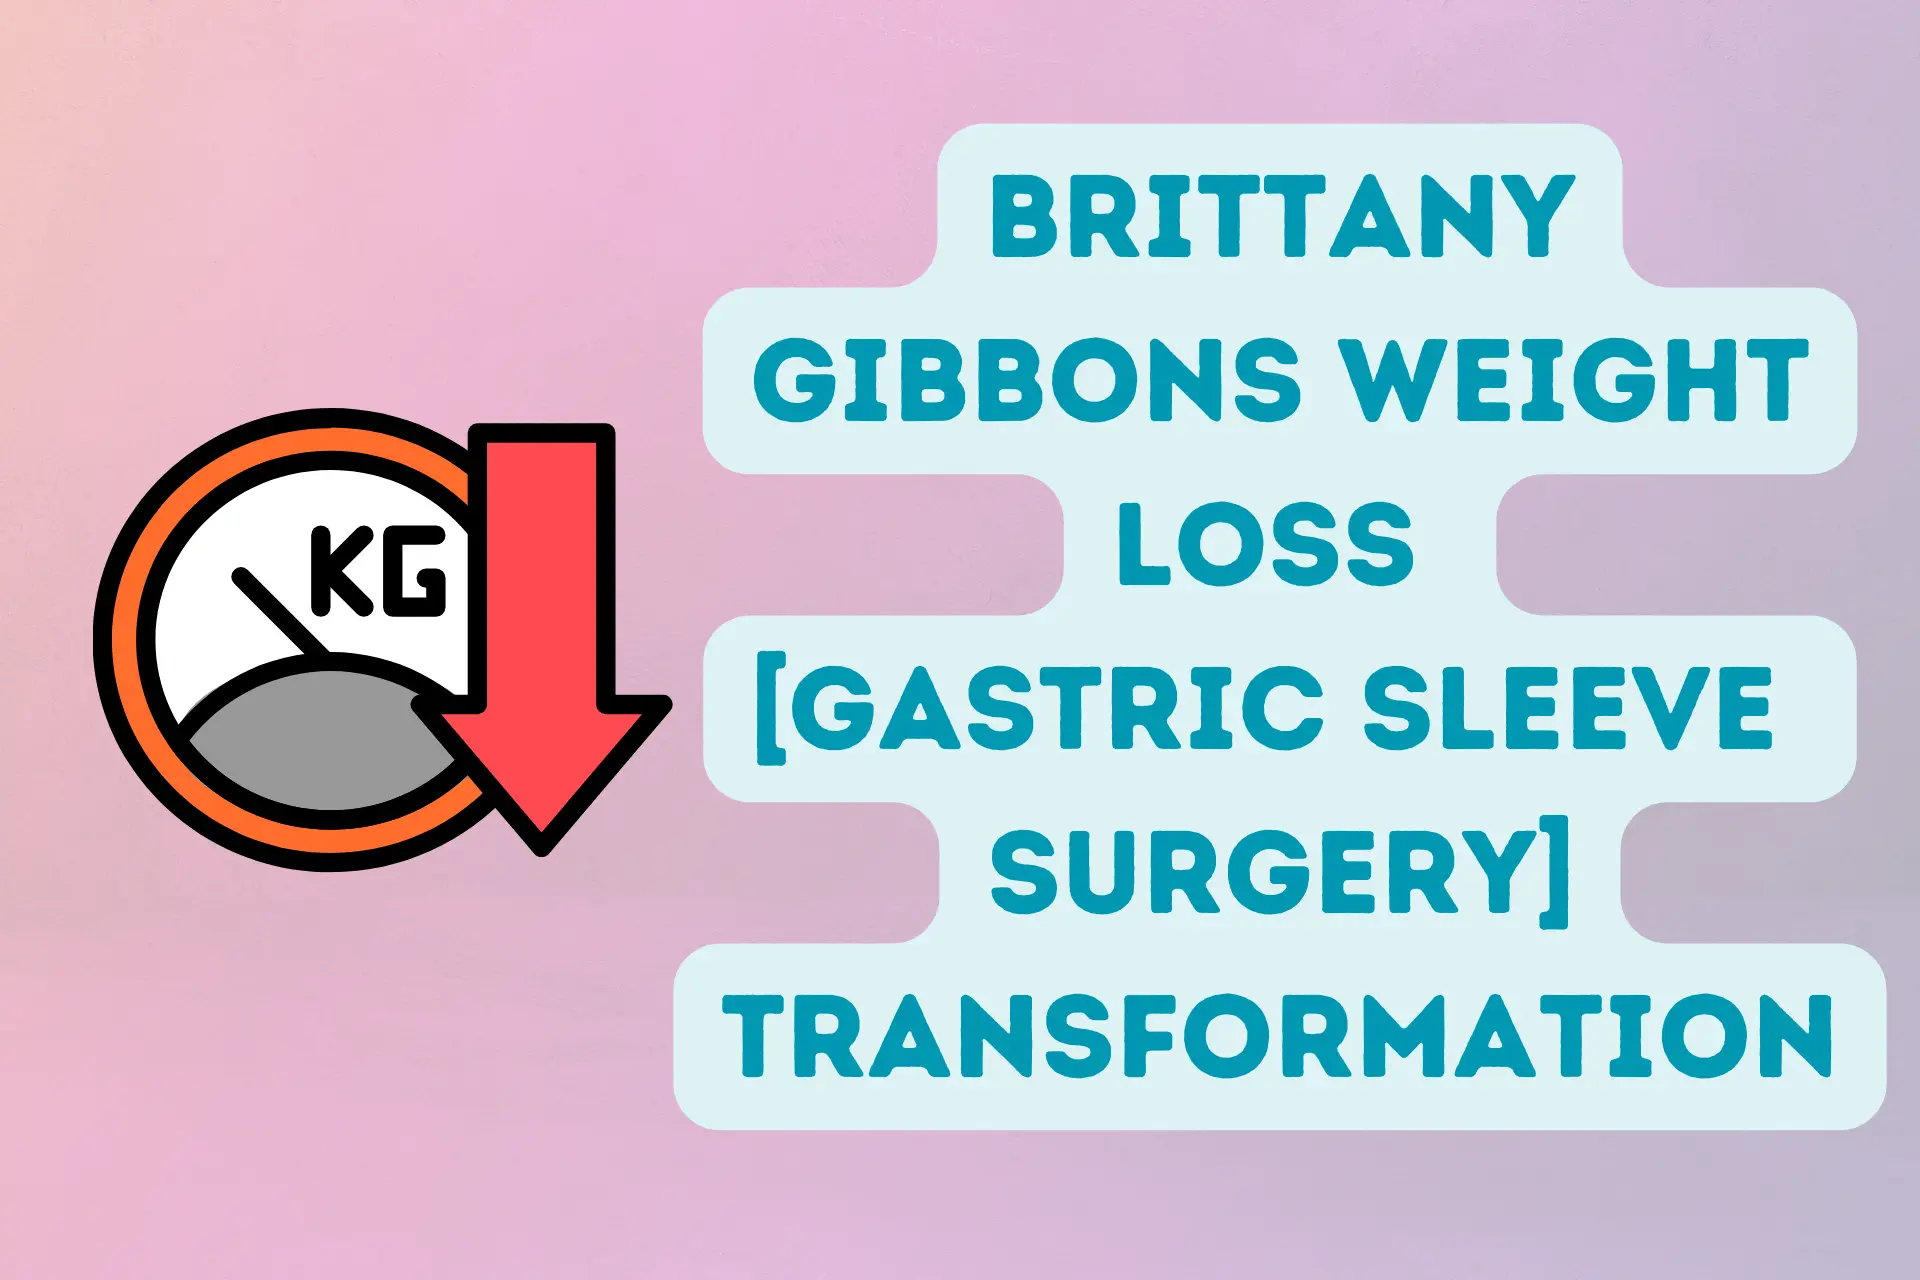 Brittany Gibbons Weight Loss